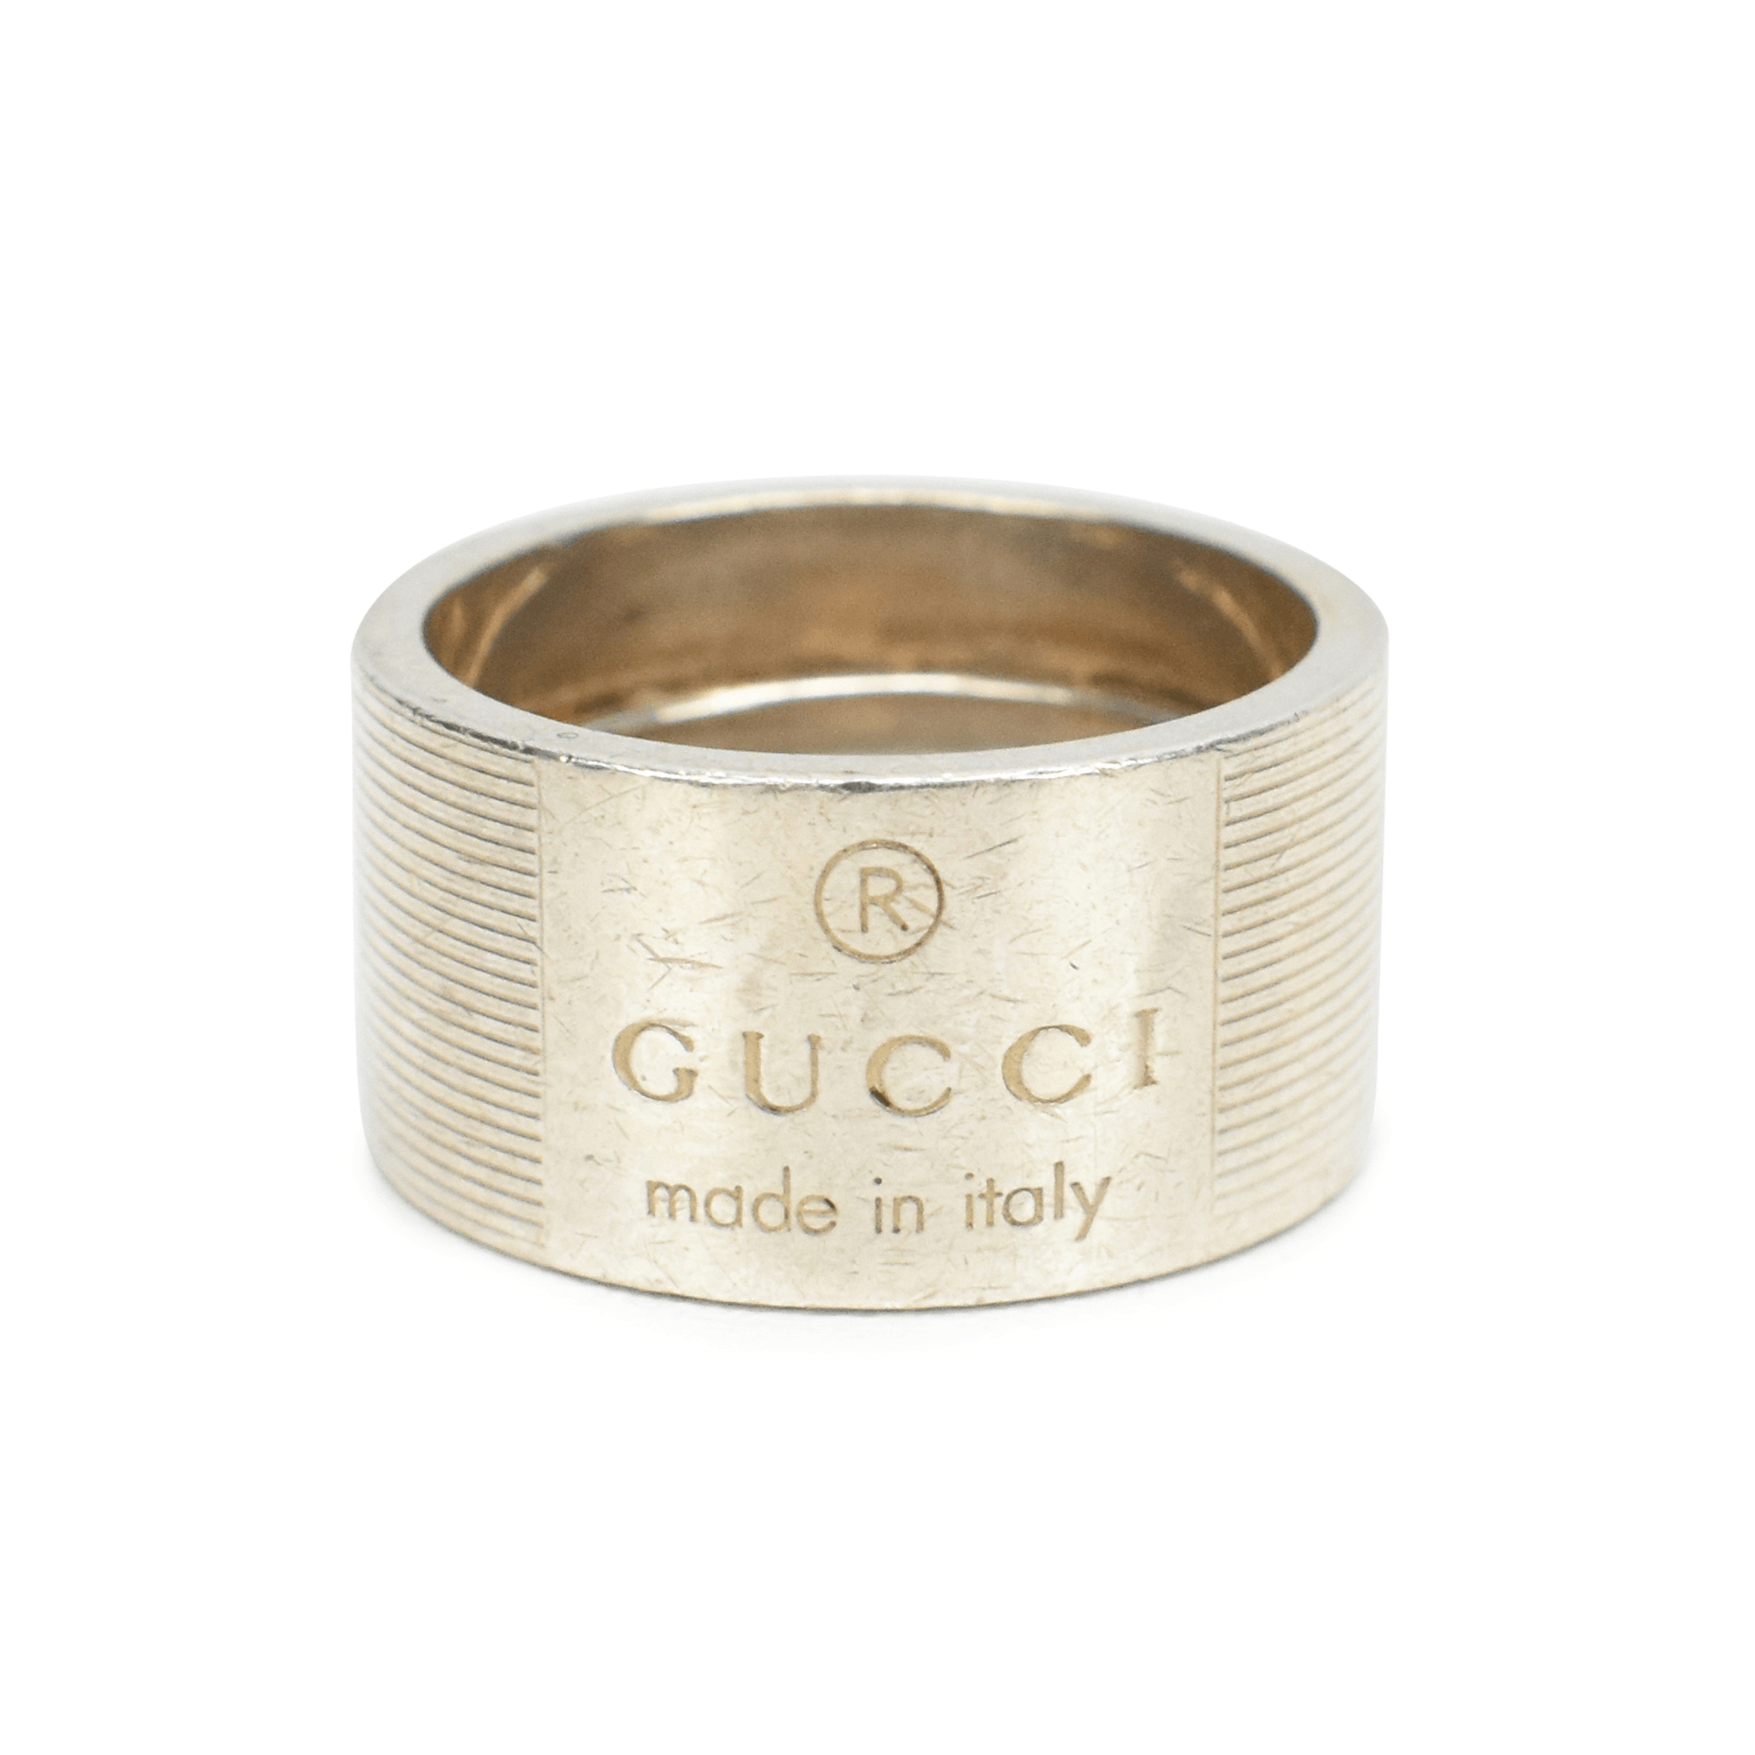 Gucci Ring - Fashionably Yours